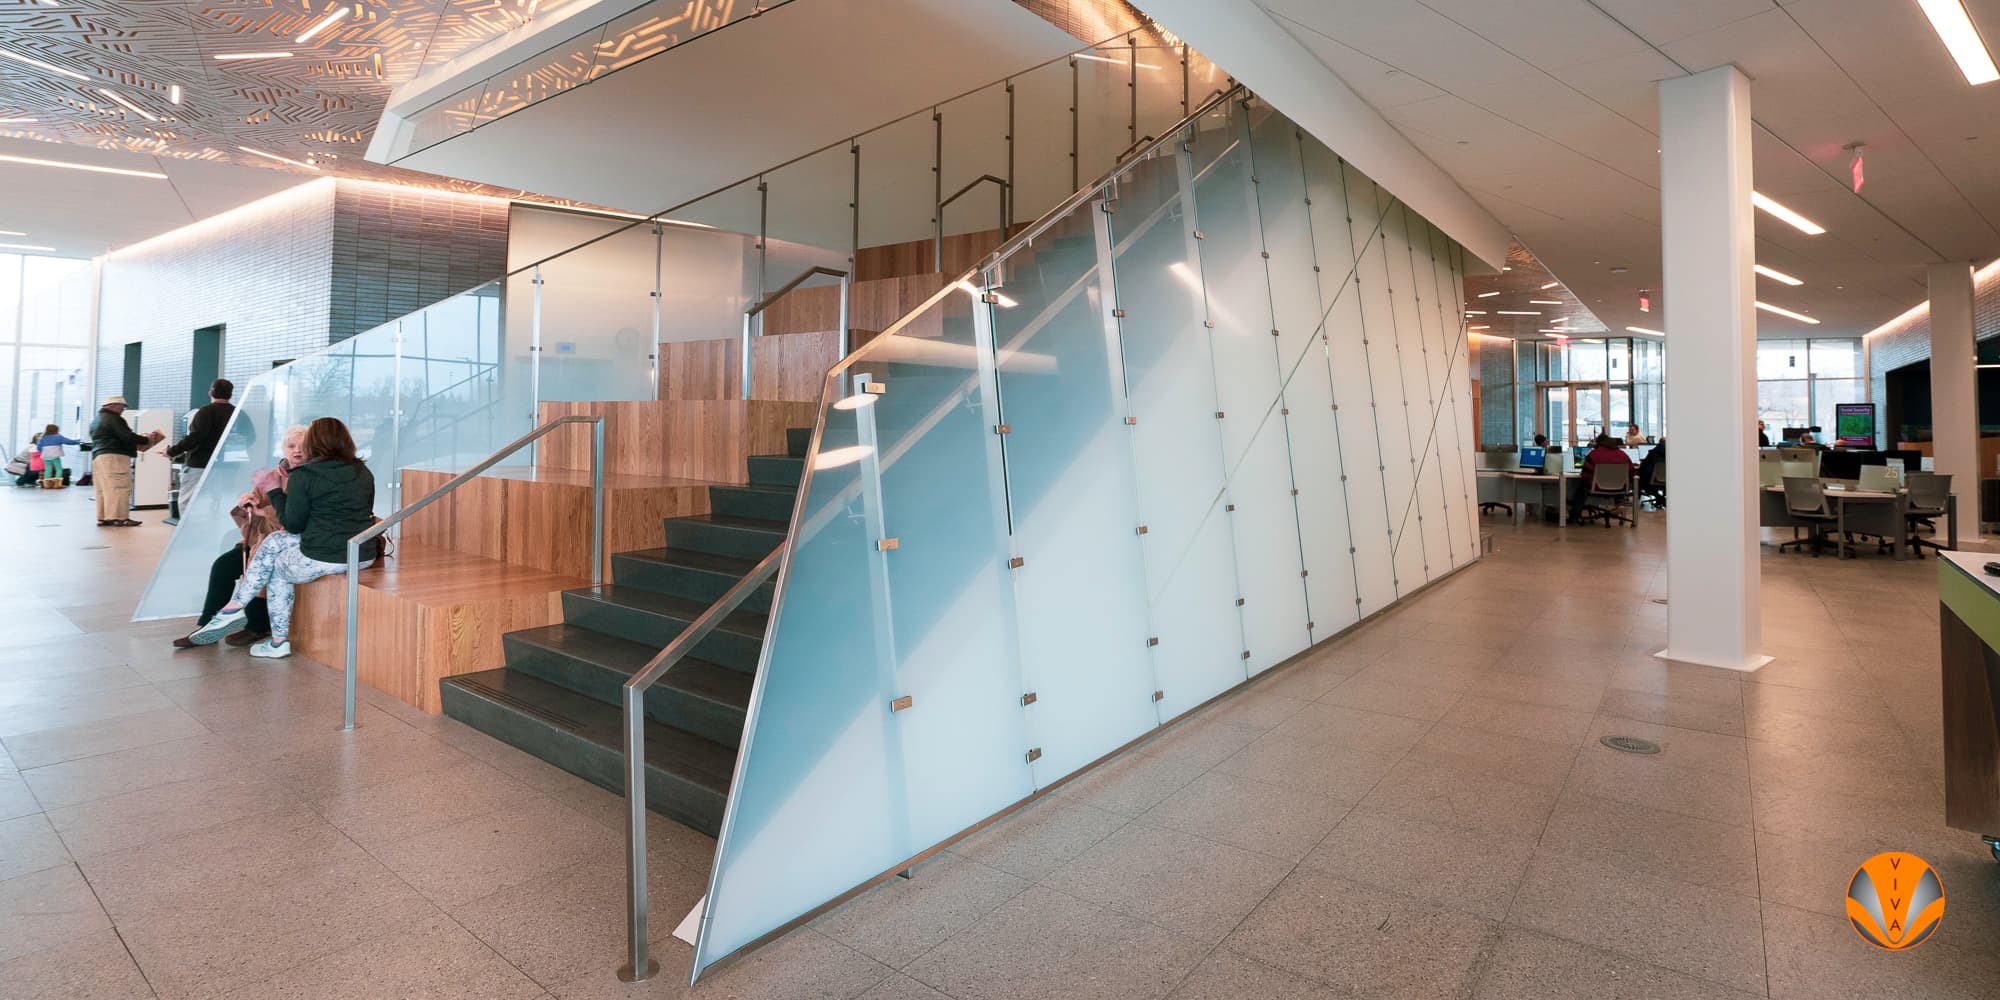 CUSTOM SOLO Glass Railing System at the Norman Central Library, in Norman, OK